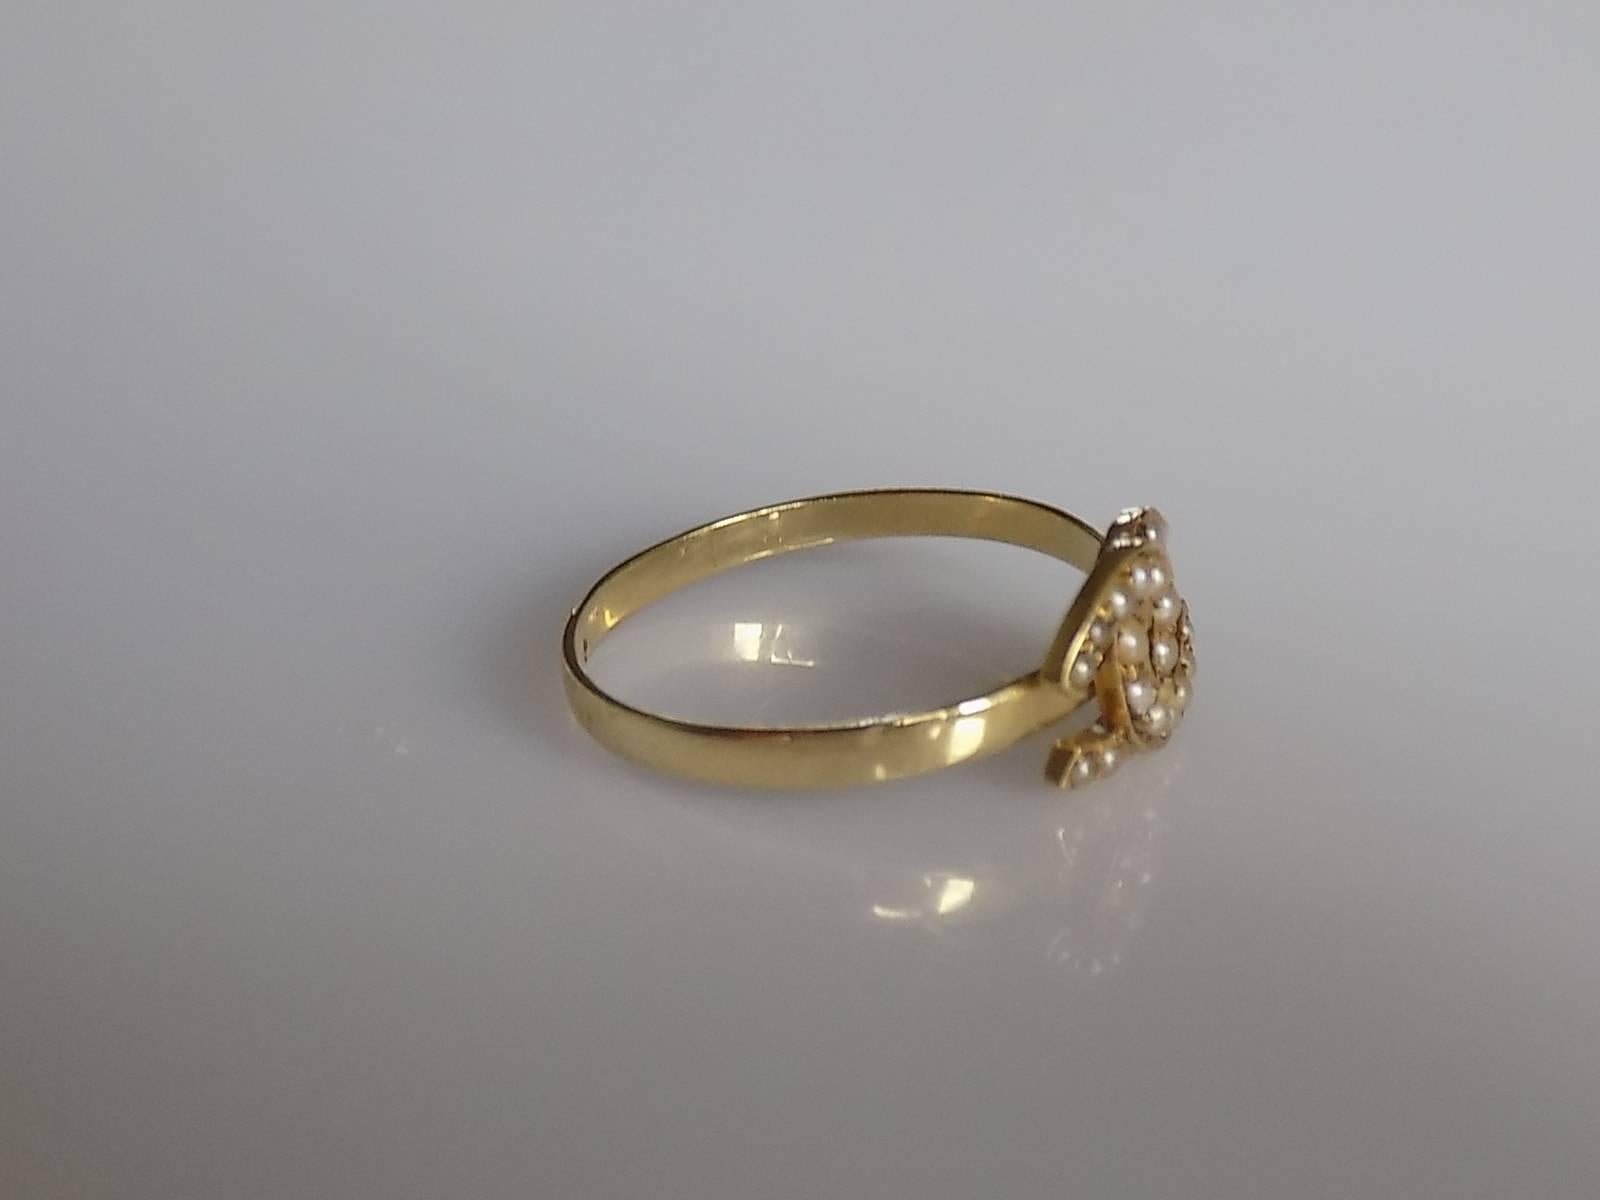 A Lovely Victorian split Seed Pearl double Horseshoe Good Luck stick pin conversion ring on a later 18 Carat Gold shank.  English origin.
Size N 1/2 UK, 7.25 US can be sized.
face of the ring 8mm x 11mm.
Weight 1.6gr.
Unmarked, tested 18 Carat